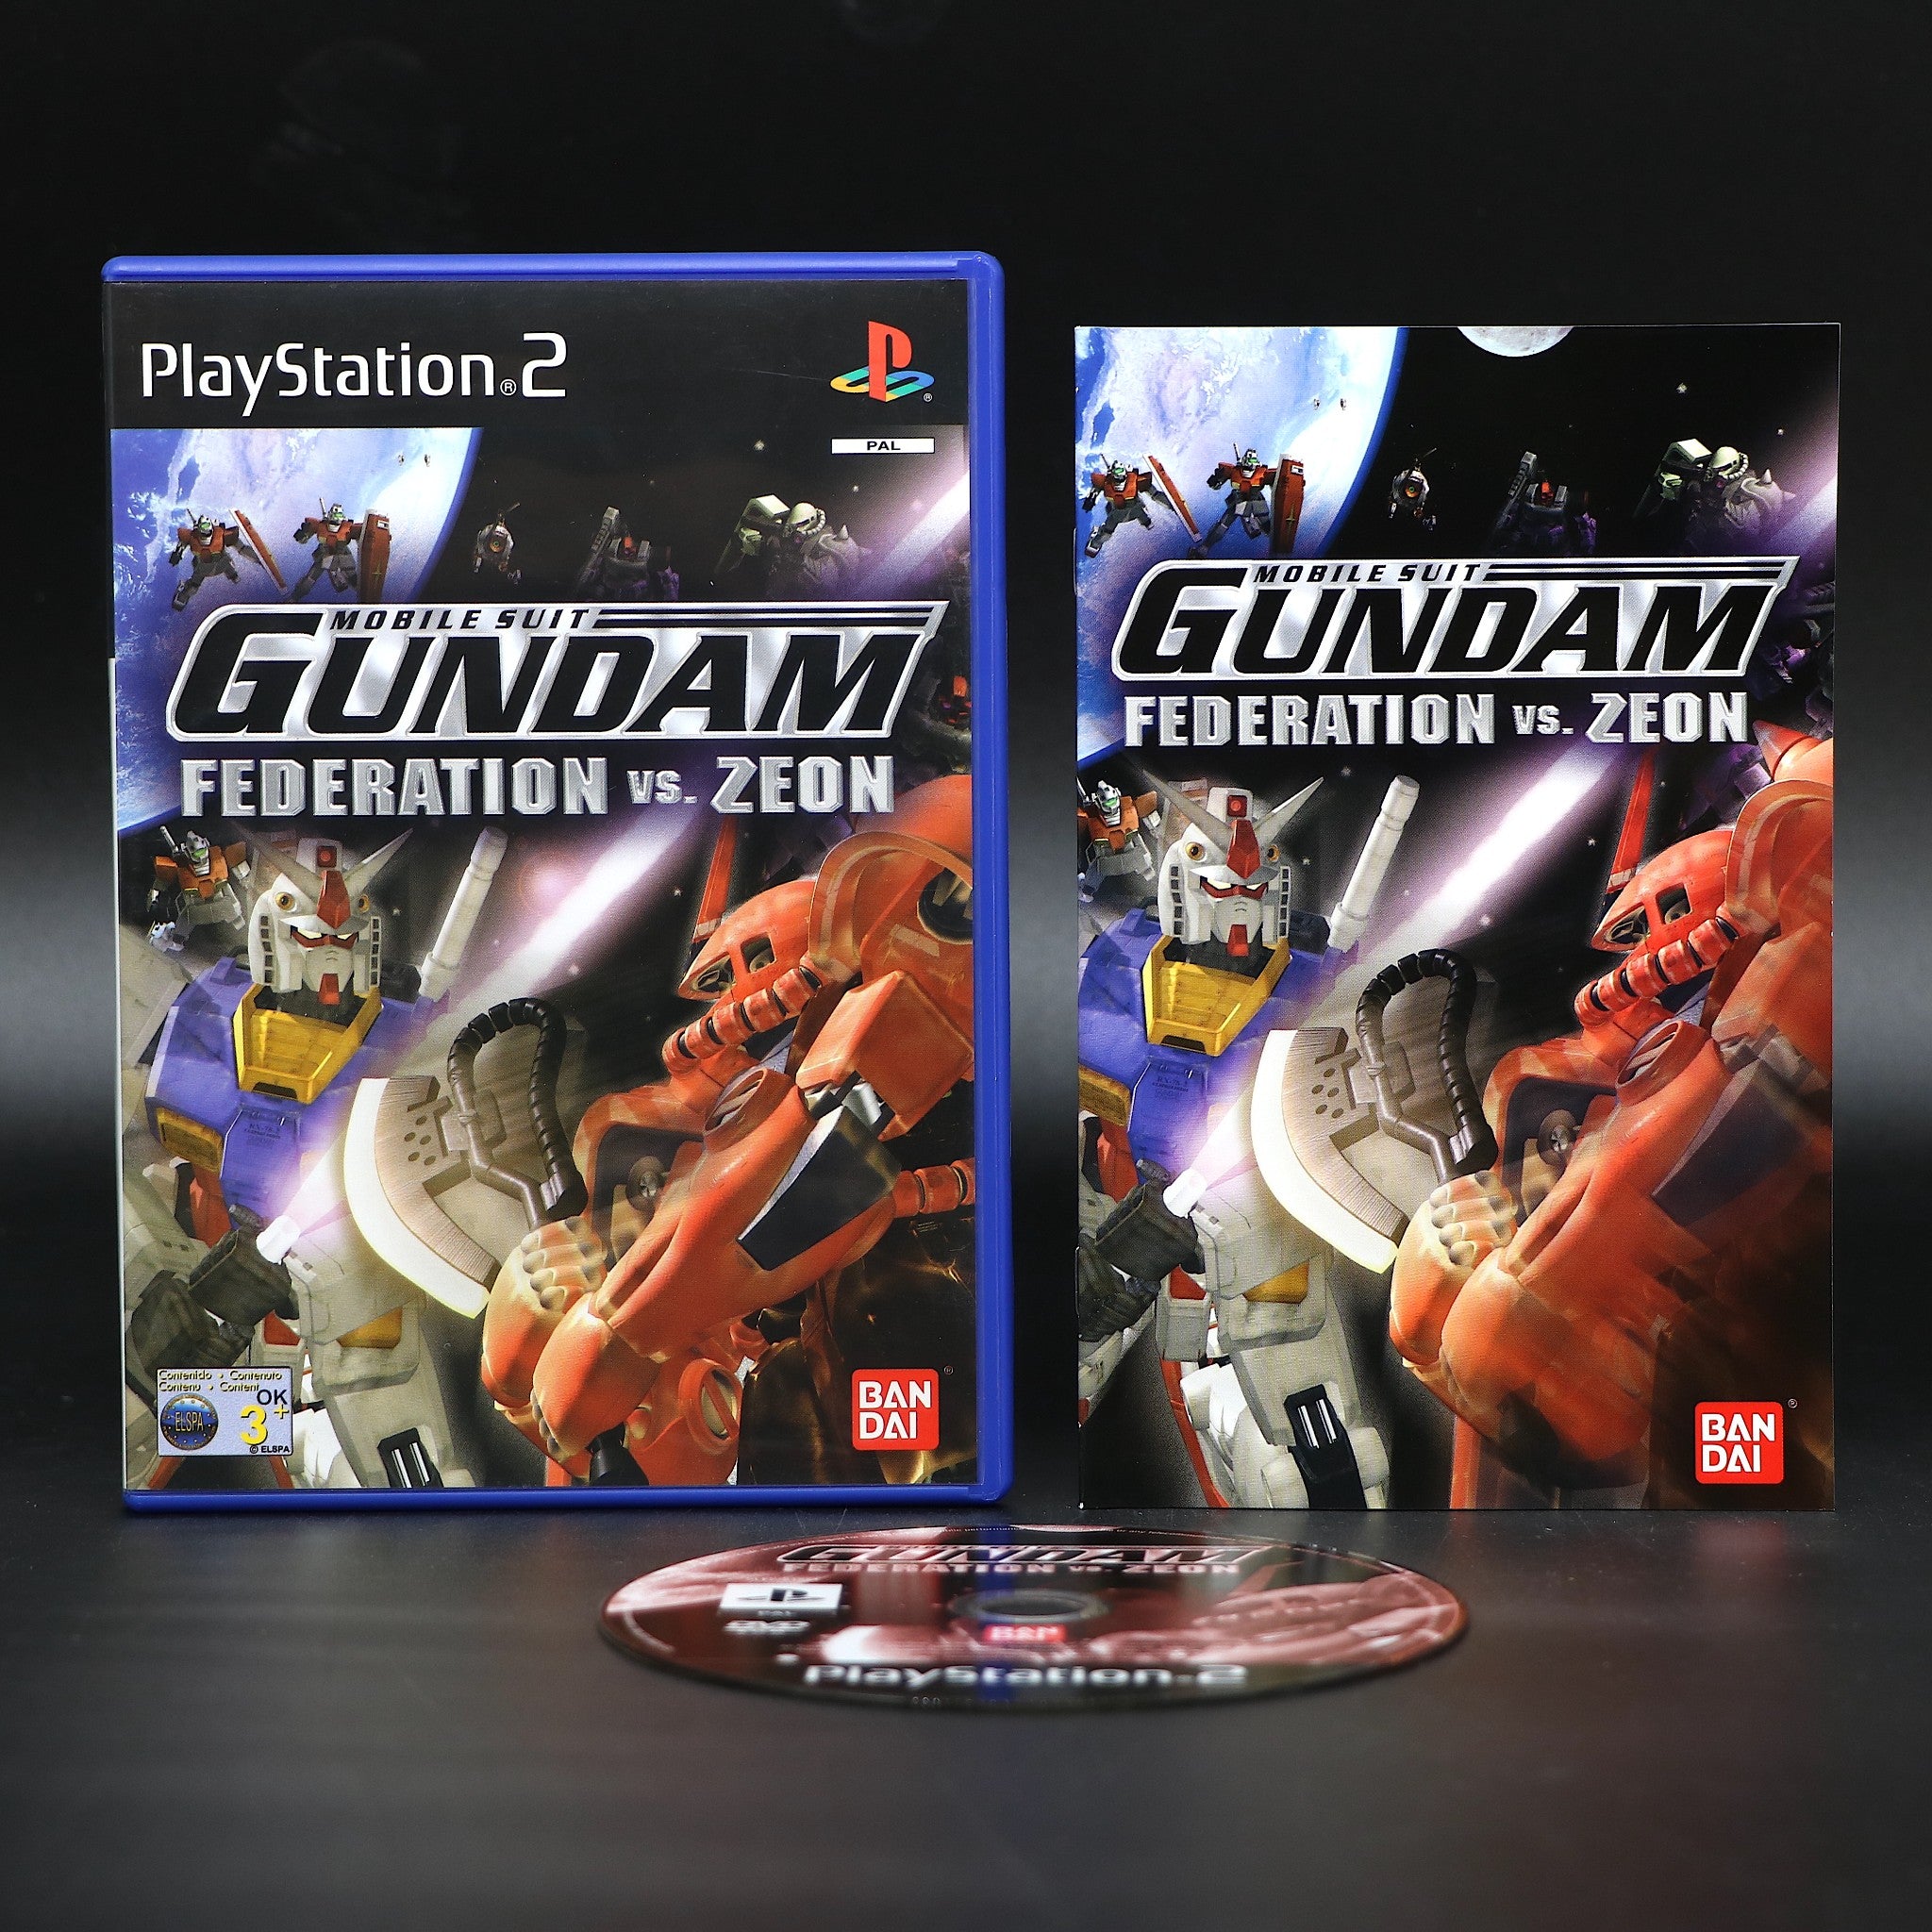 Mobile Suit Gundam | Federation Vs. Zeon | Sony PS2 Game | Very Good